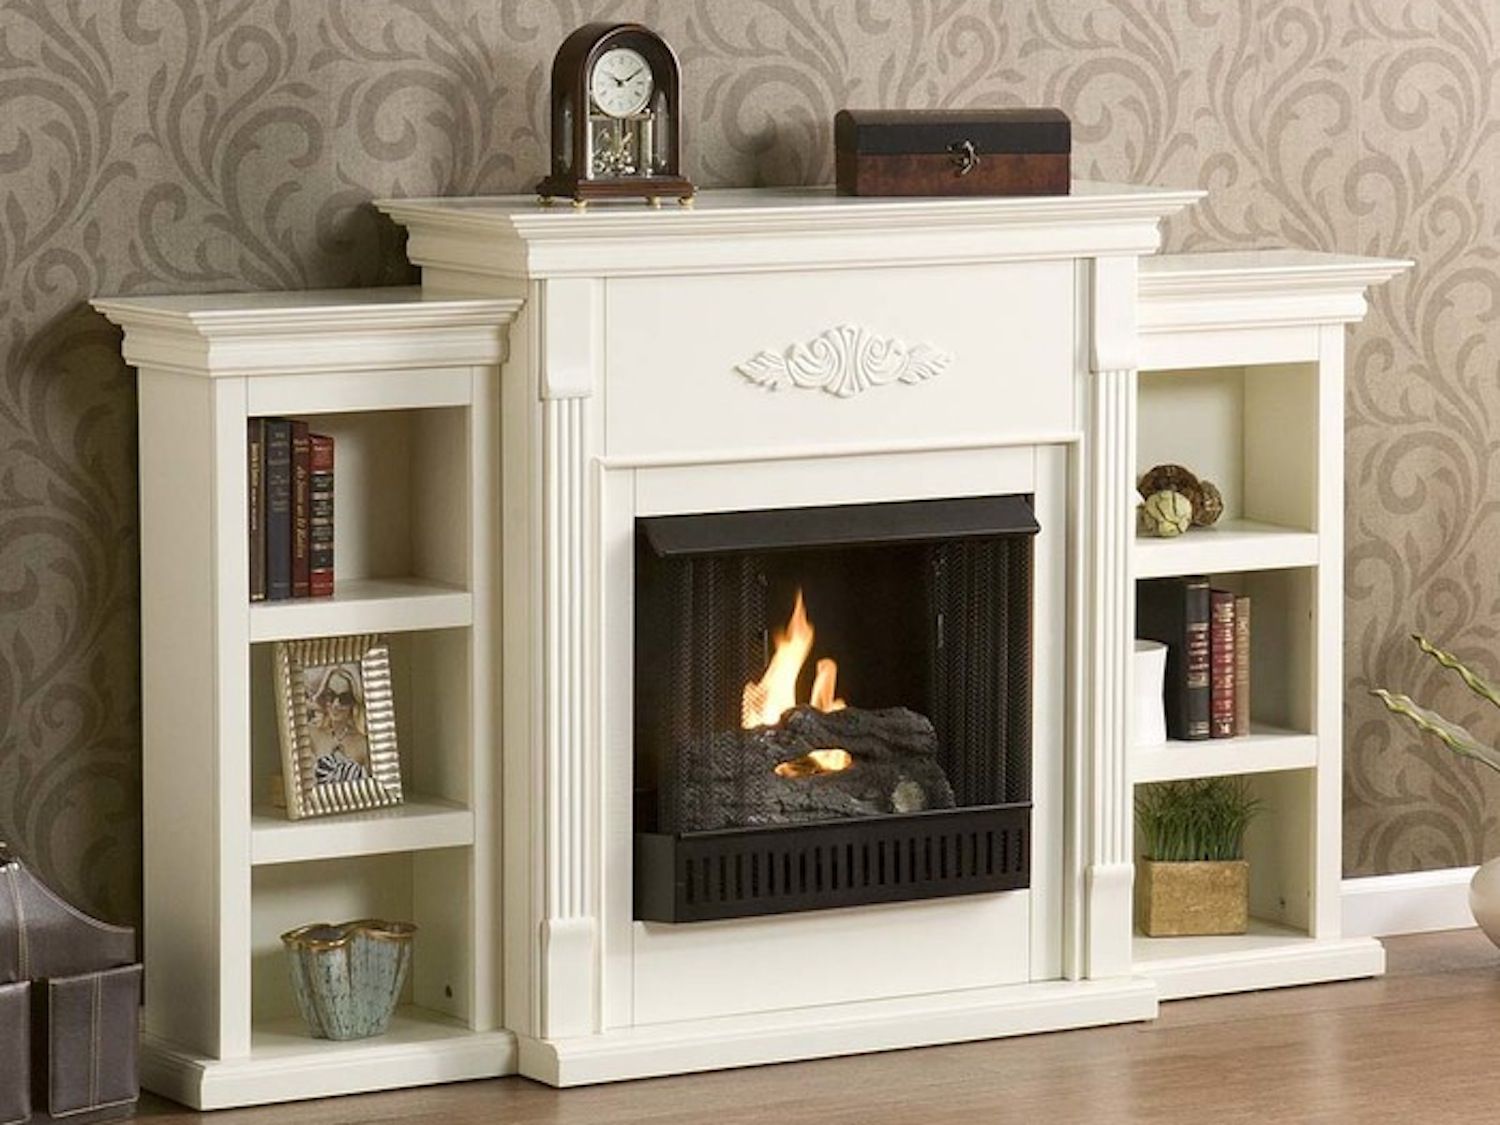 Gas Fireplace Troubleshooting Flame Goes Out Inspirational How to Use Gel Fuel Fireplaces Indoors or Outdoors